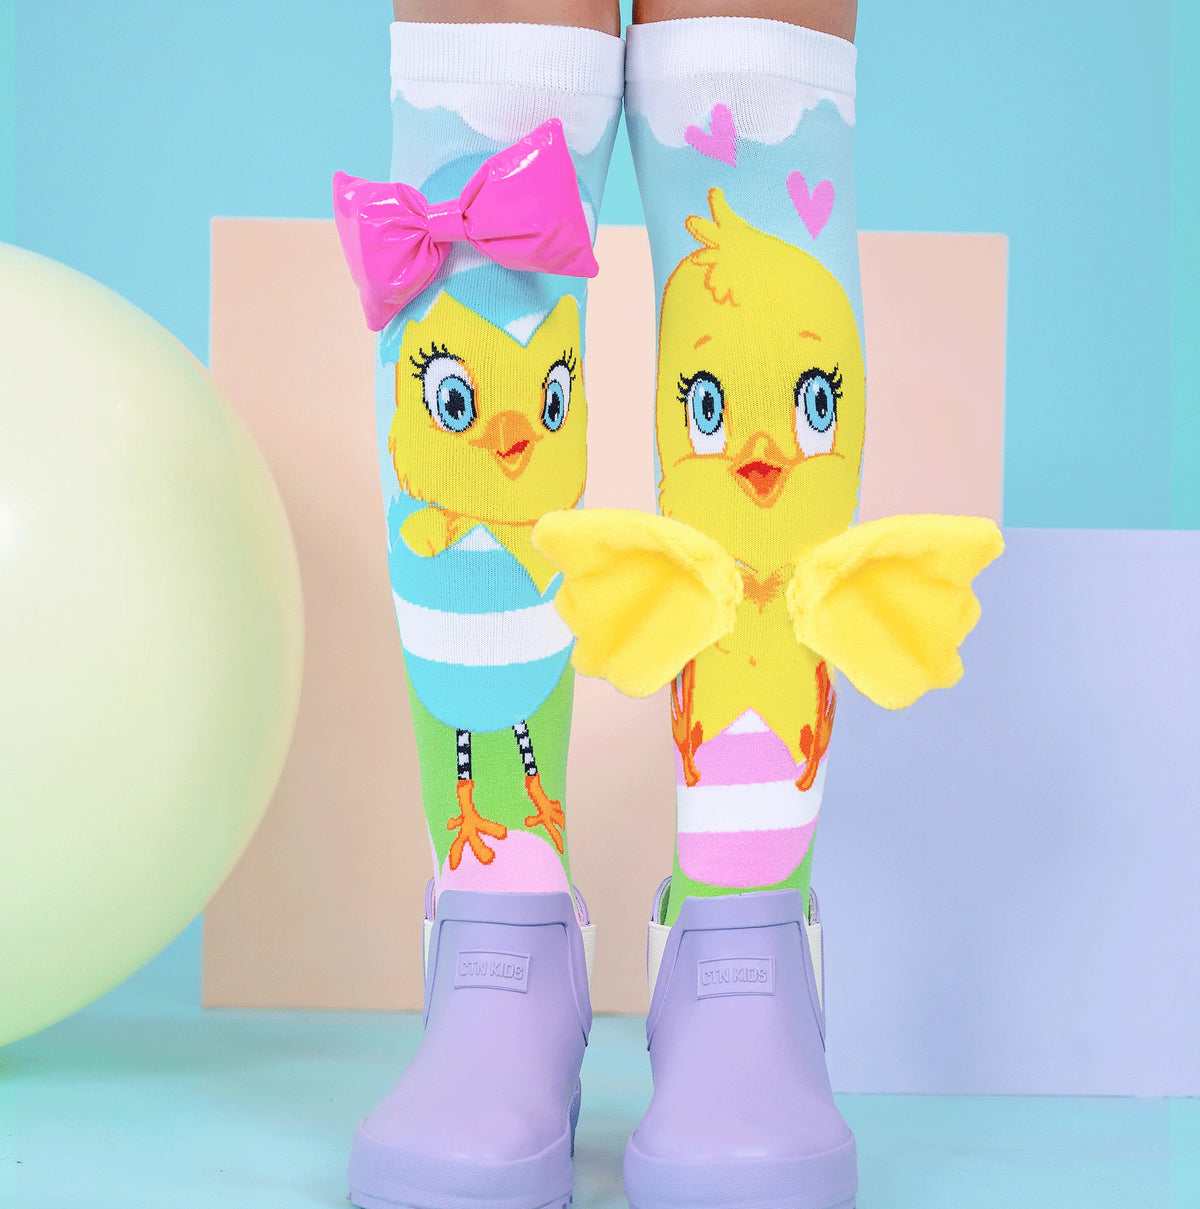 Crazy Fun Colourful Socks For Babies, Toddlers & Adults, MADMIA